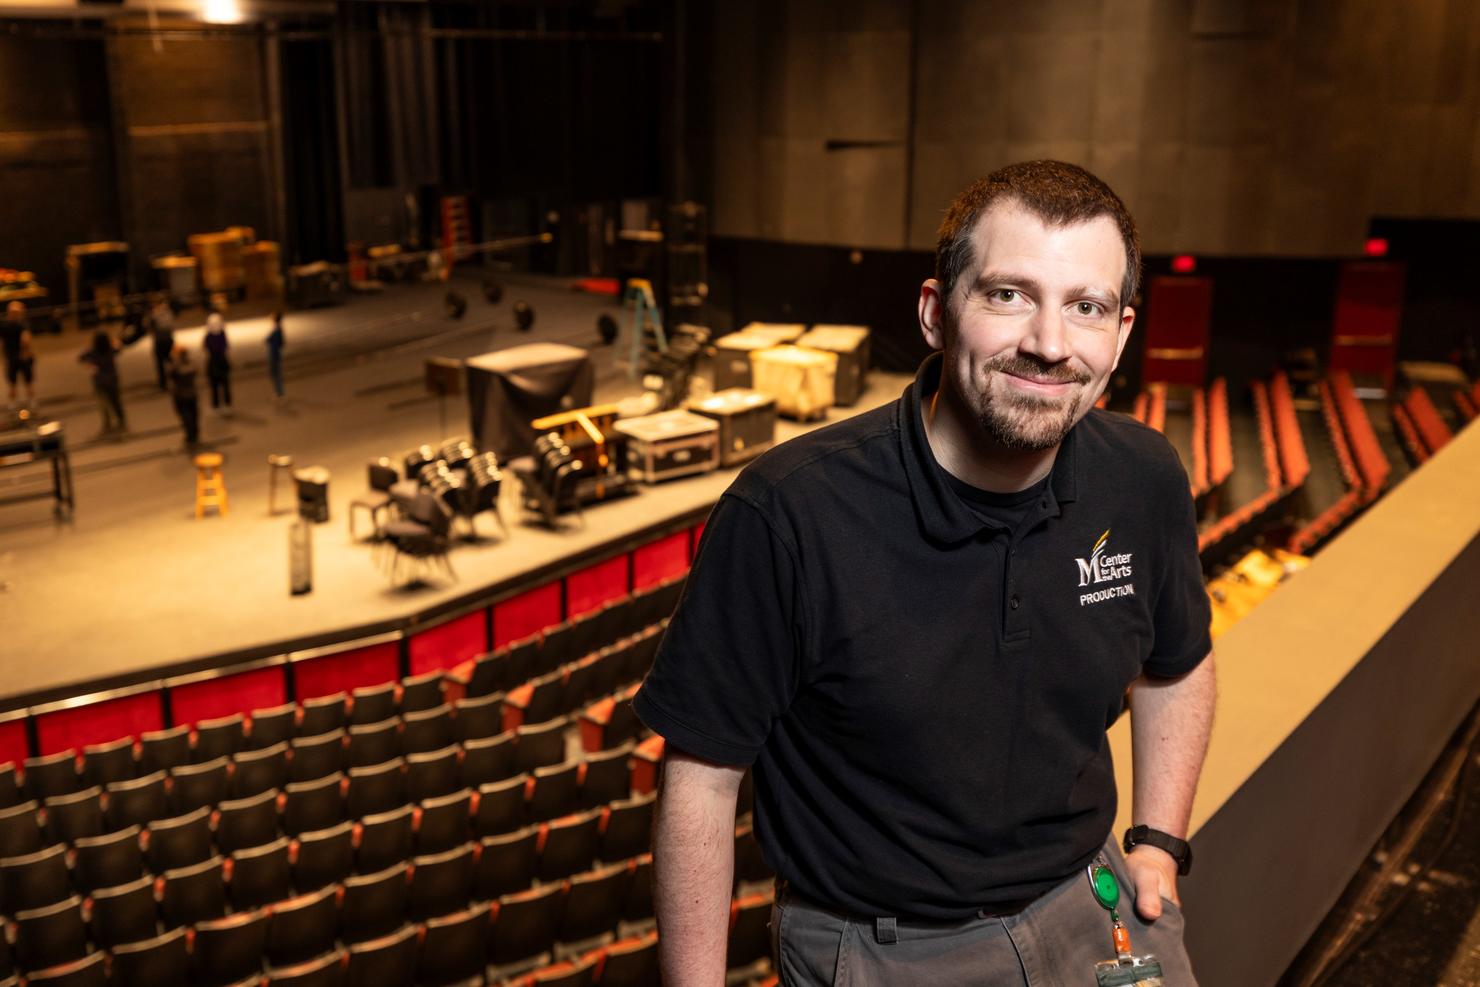 Will Gautney stands on the balcony of the Center for the Arts with the stage below 